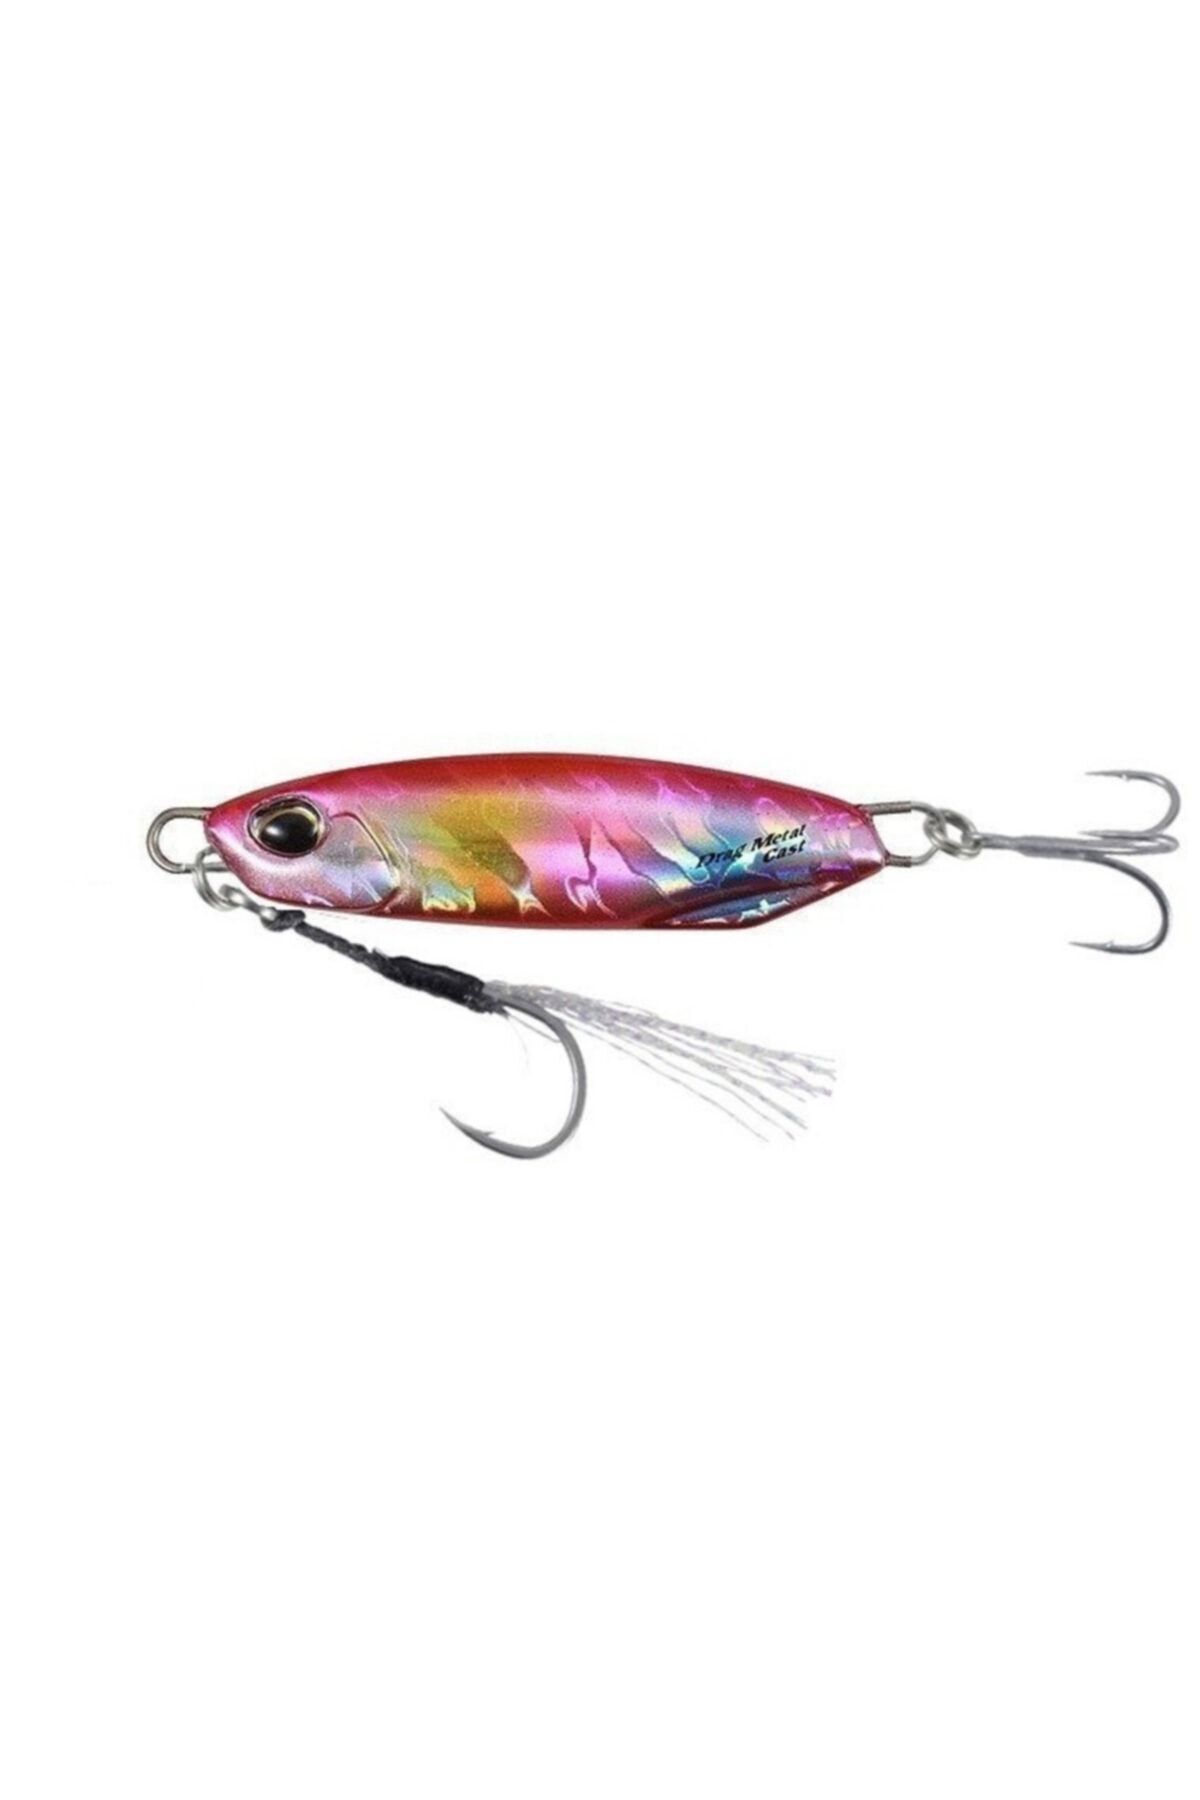 Duo Drag Metal Cast Jig 40gr. Pda0070 / Sparkling Pink Candy